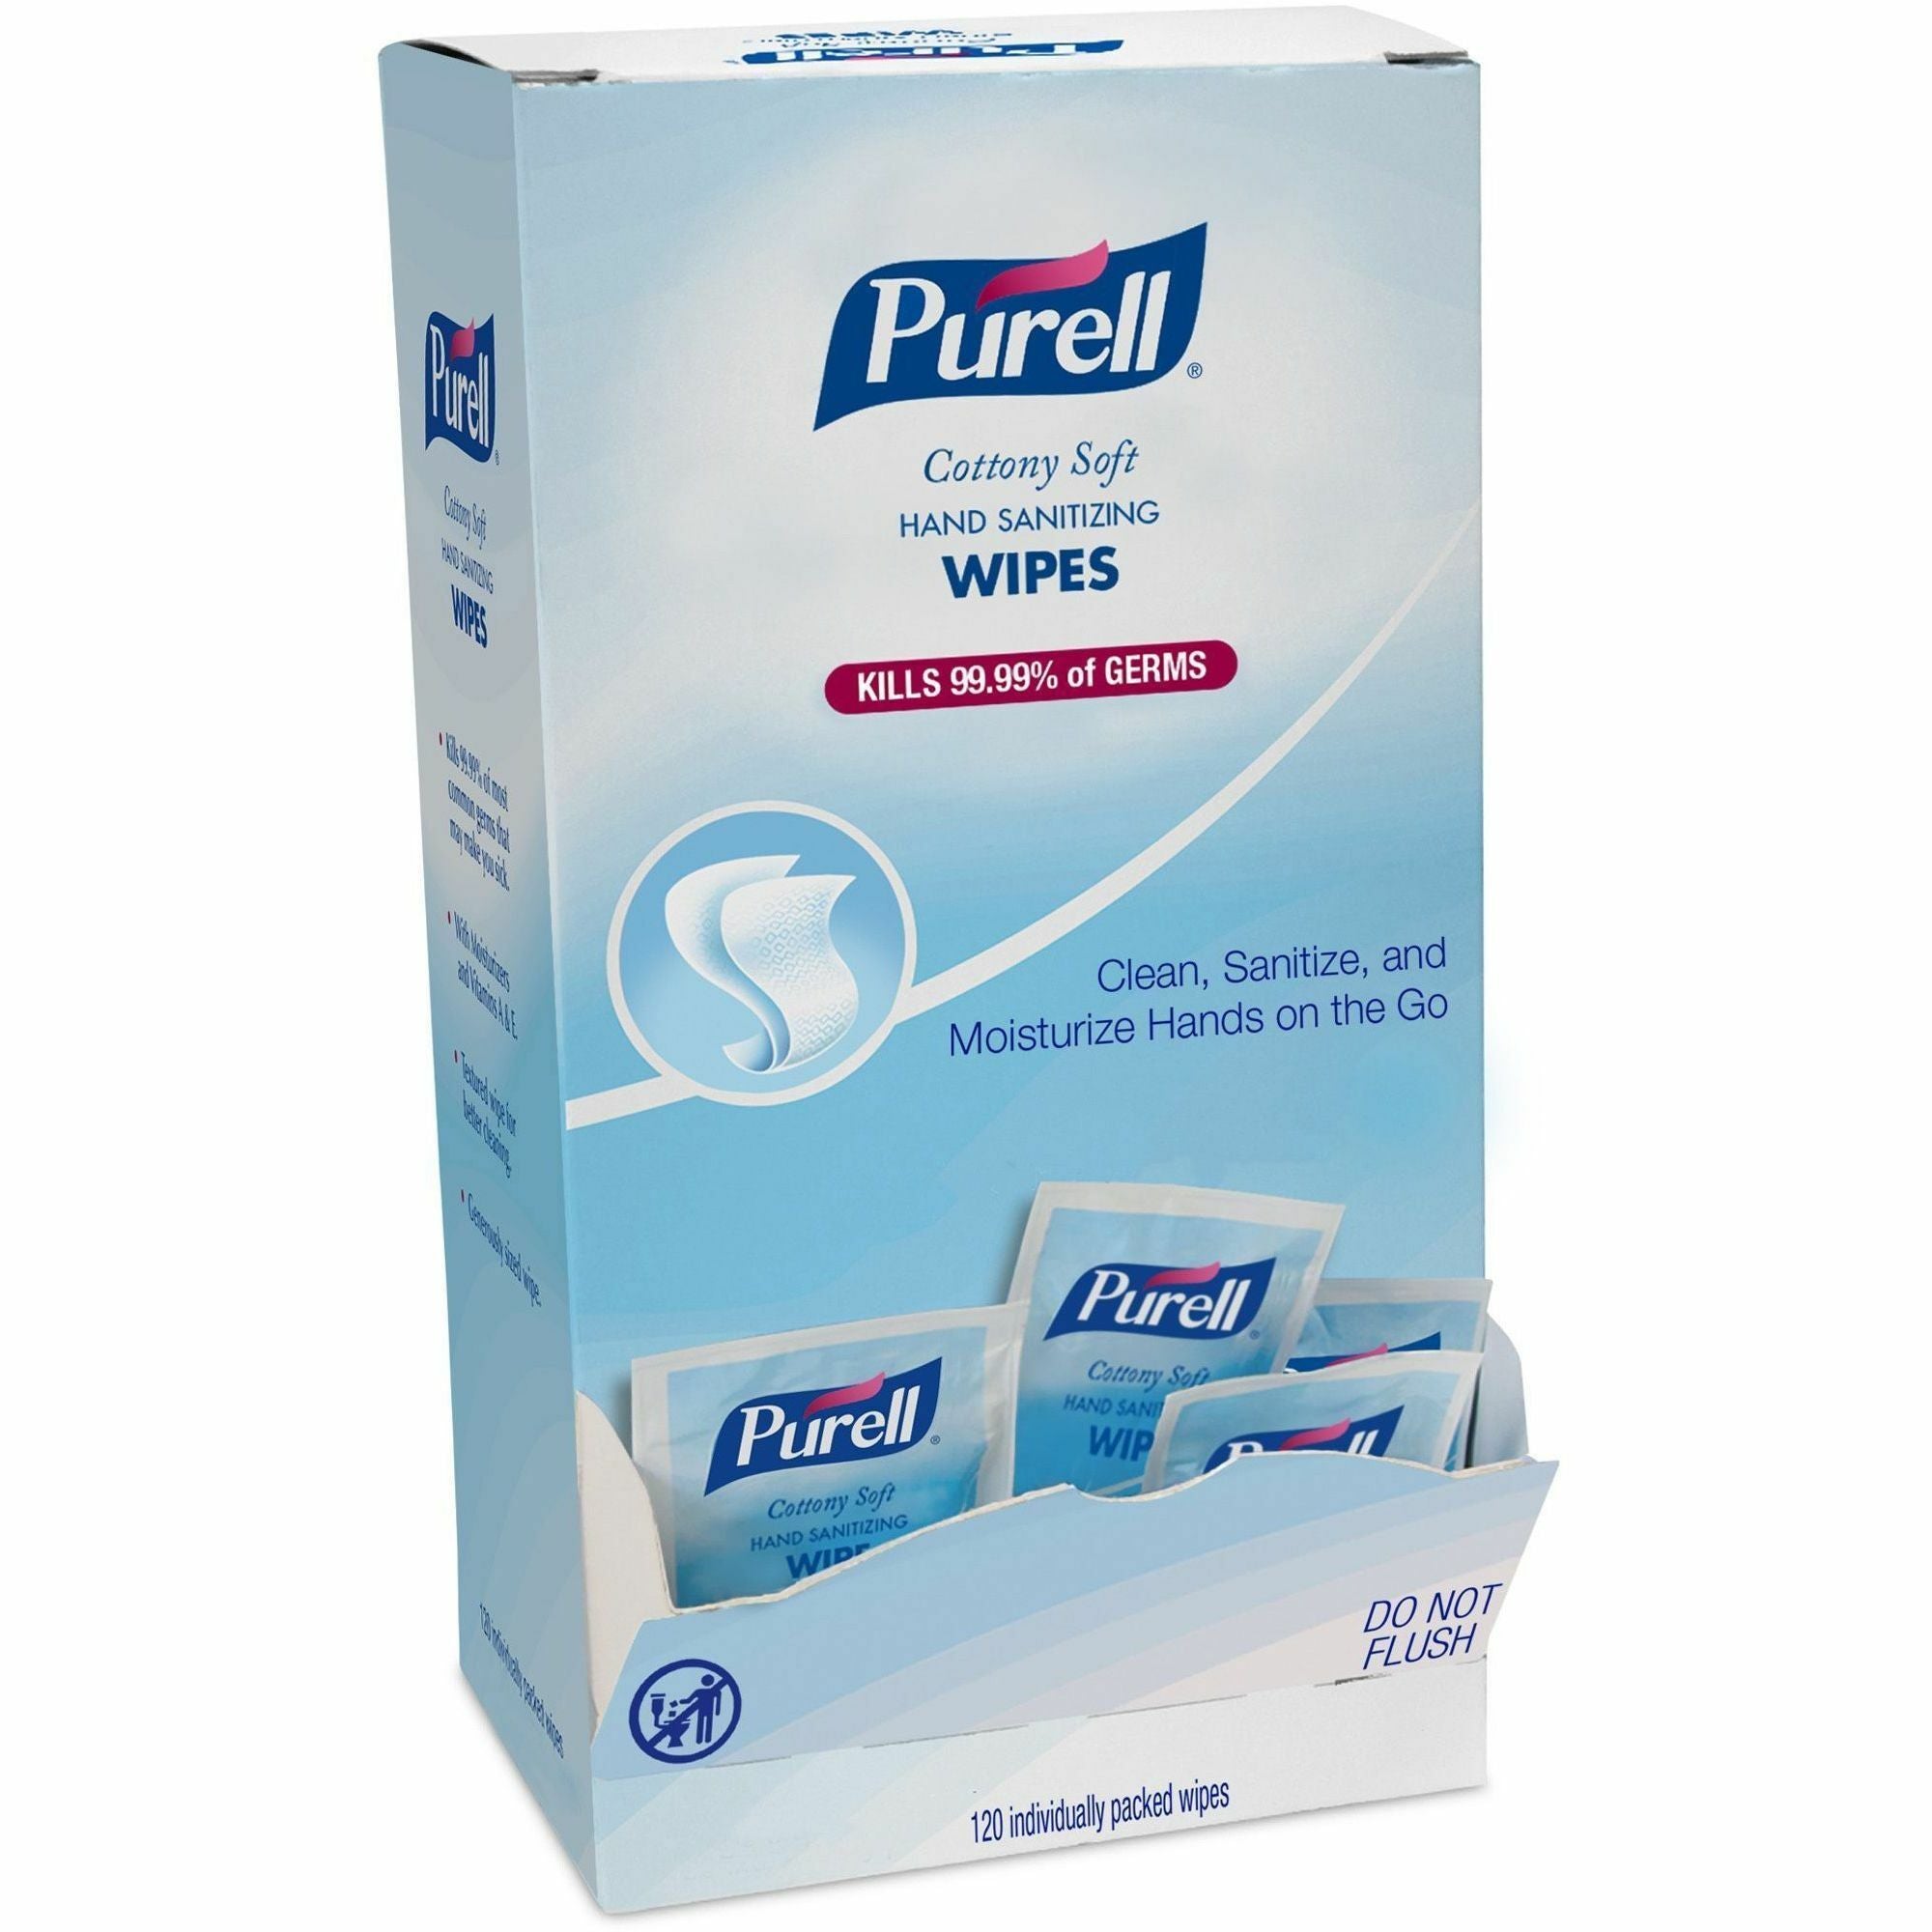 purell-cottony-soft-sanitizing-wipes-5-x-7-white-soft-moist-textured-individually-wrapped-for-hand-120-per-box-120-box_goj902712 - 1